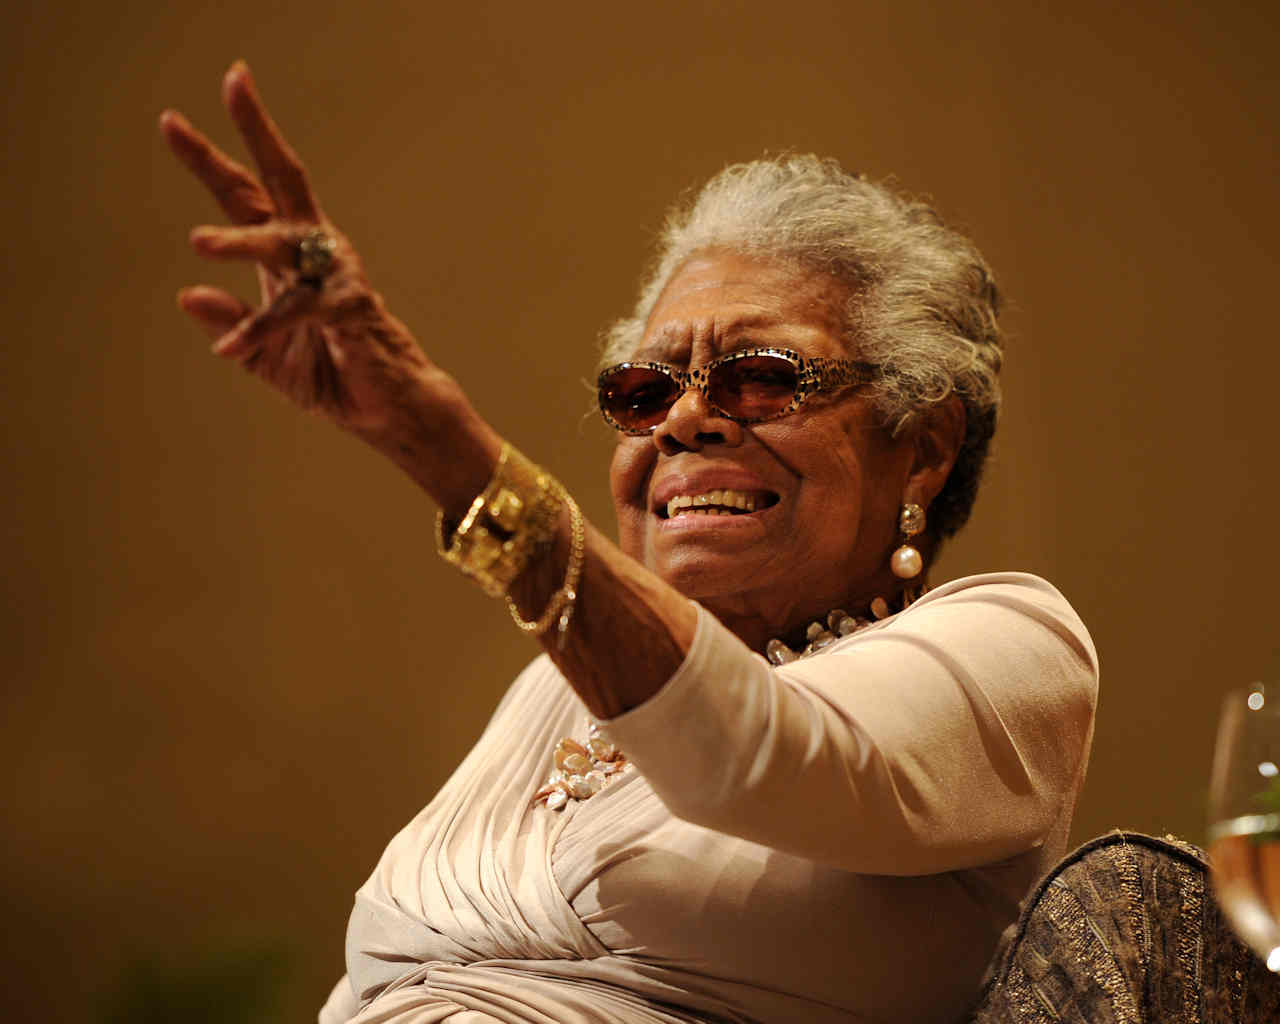 Maya Angelou speaks on race relations at Congregation B'nai Israel and Ebenezer Baptist Church on January 16, 2014 in Boca Raton, Florida. Angelou died on May 28 at the age of 86. <span class=meta>(Photo by Jeff Daly/Invision/AP)</span>